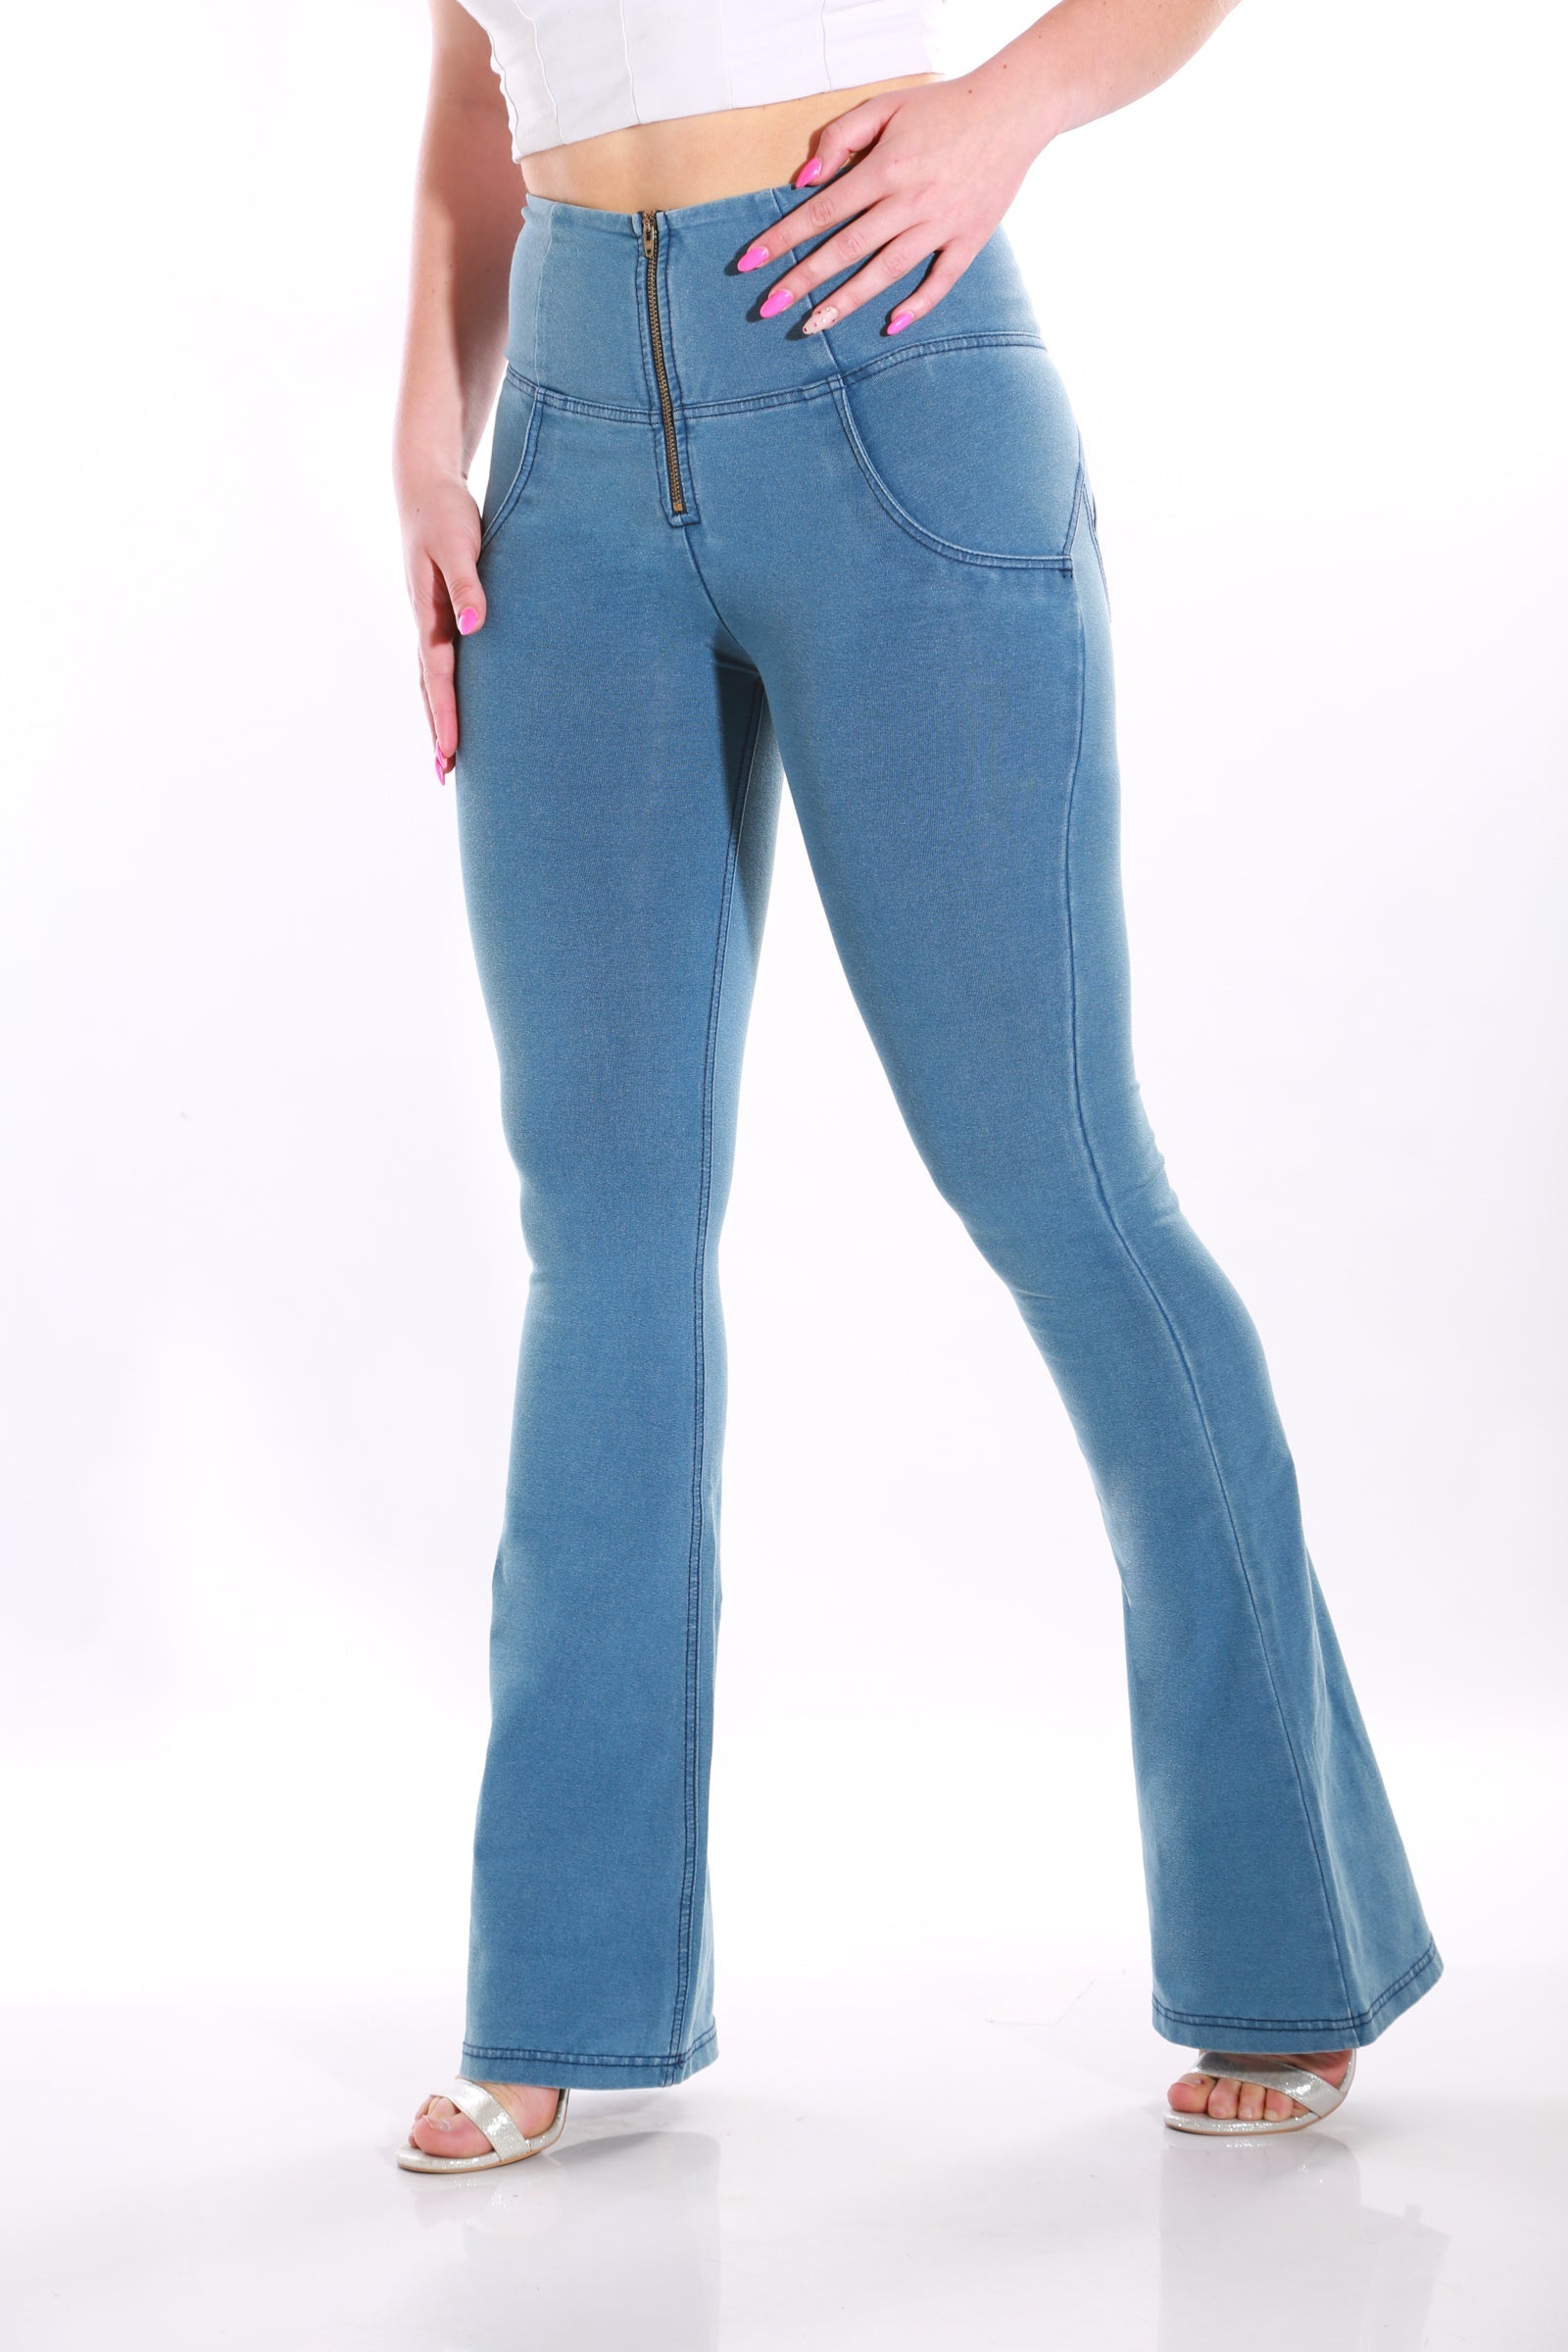 Image of High waist Bootleg Butt lifting Flare Shaping jeans/Jeggings - Light Blue